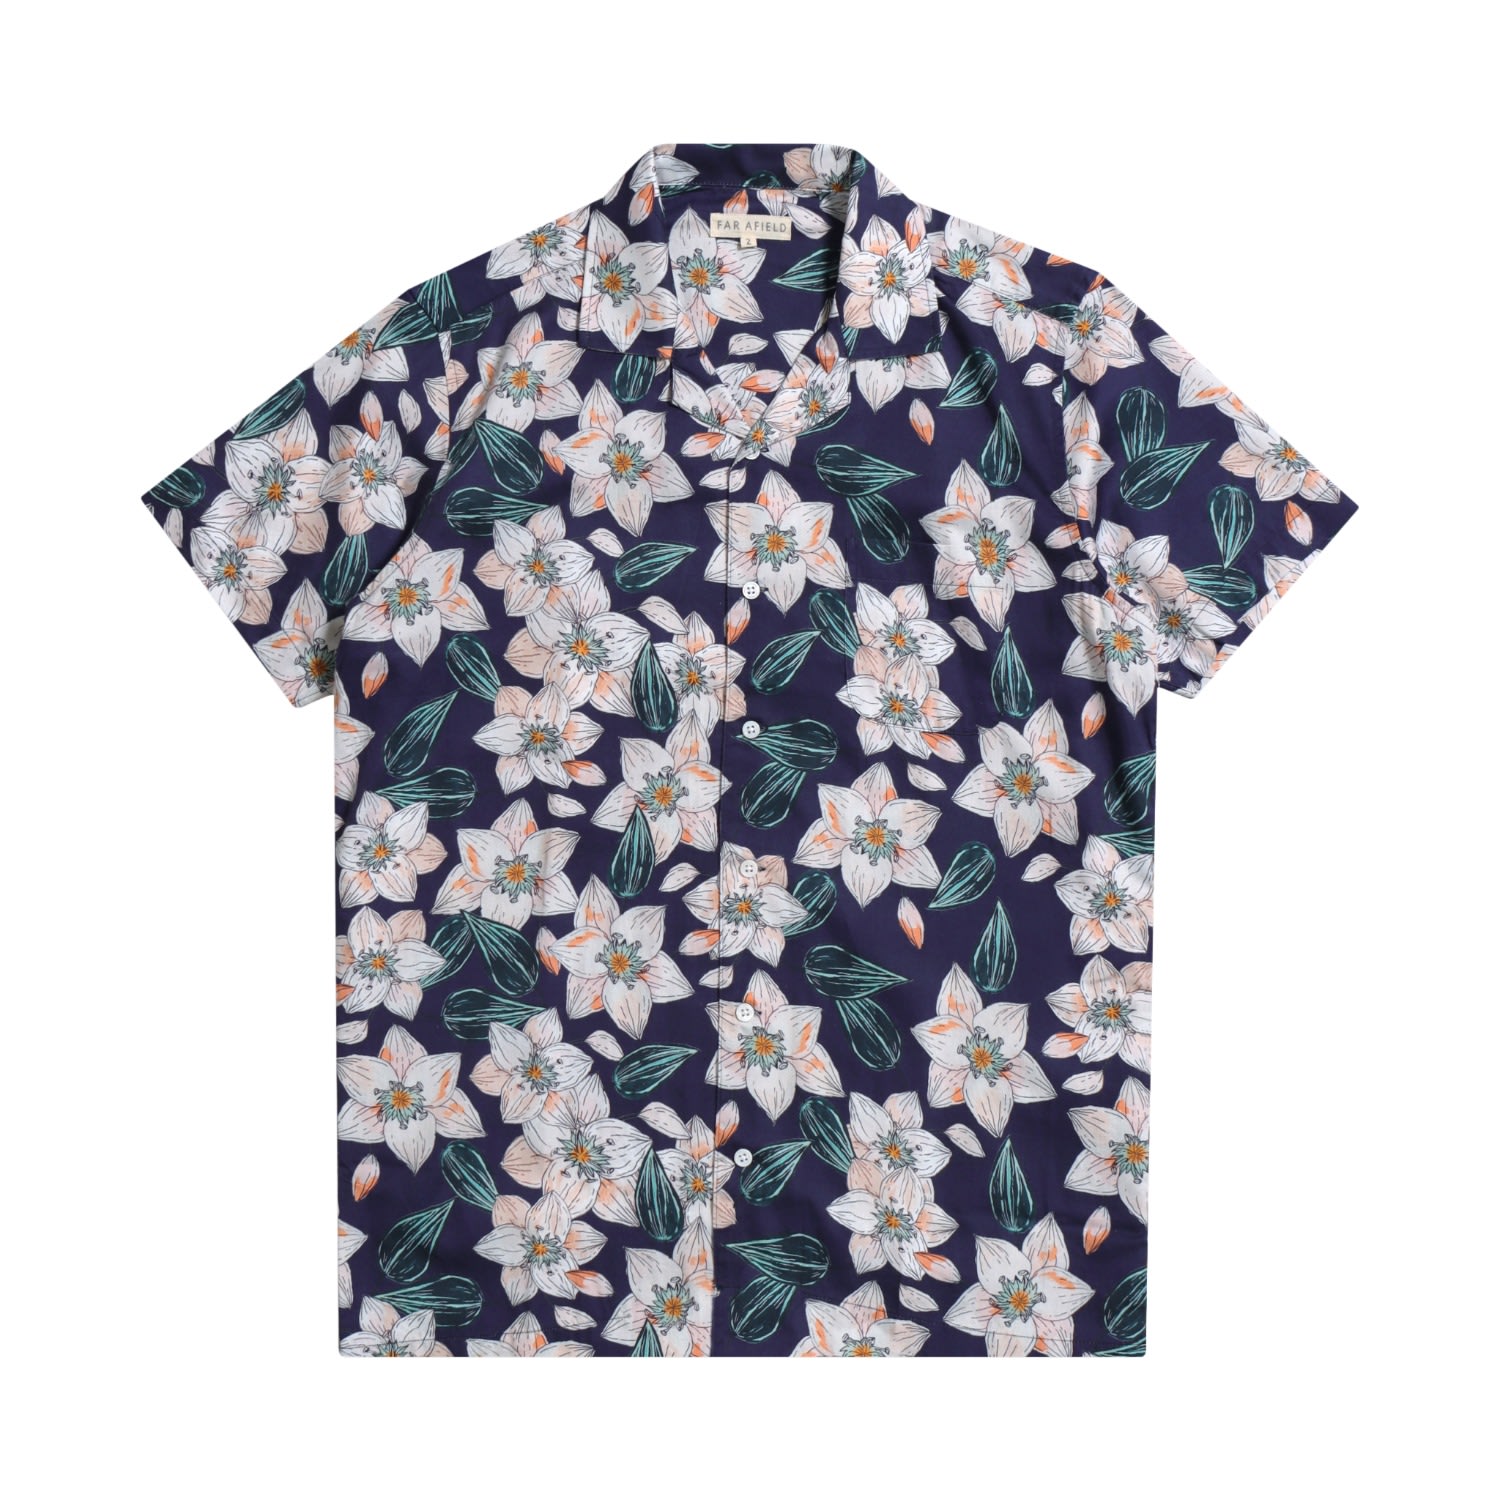 Men's Stachio S/S Shirt - Keiter Floral - Navy Small Far Afield